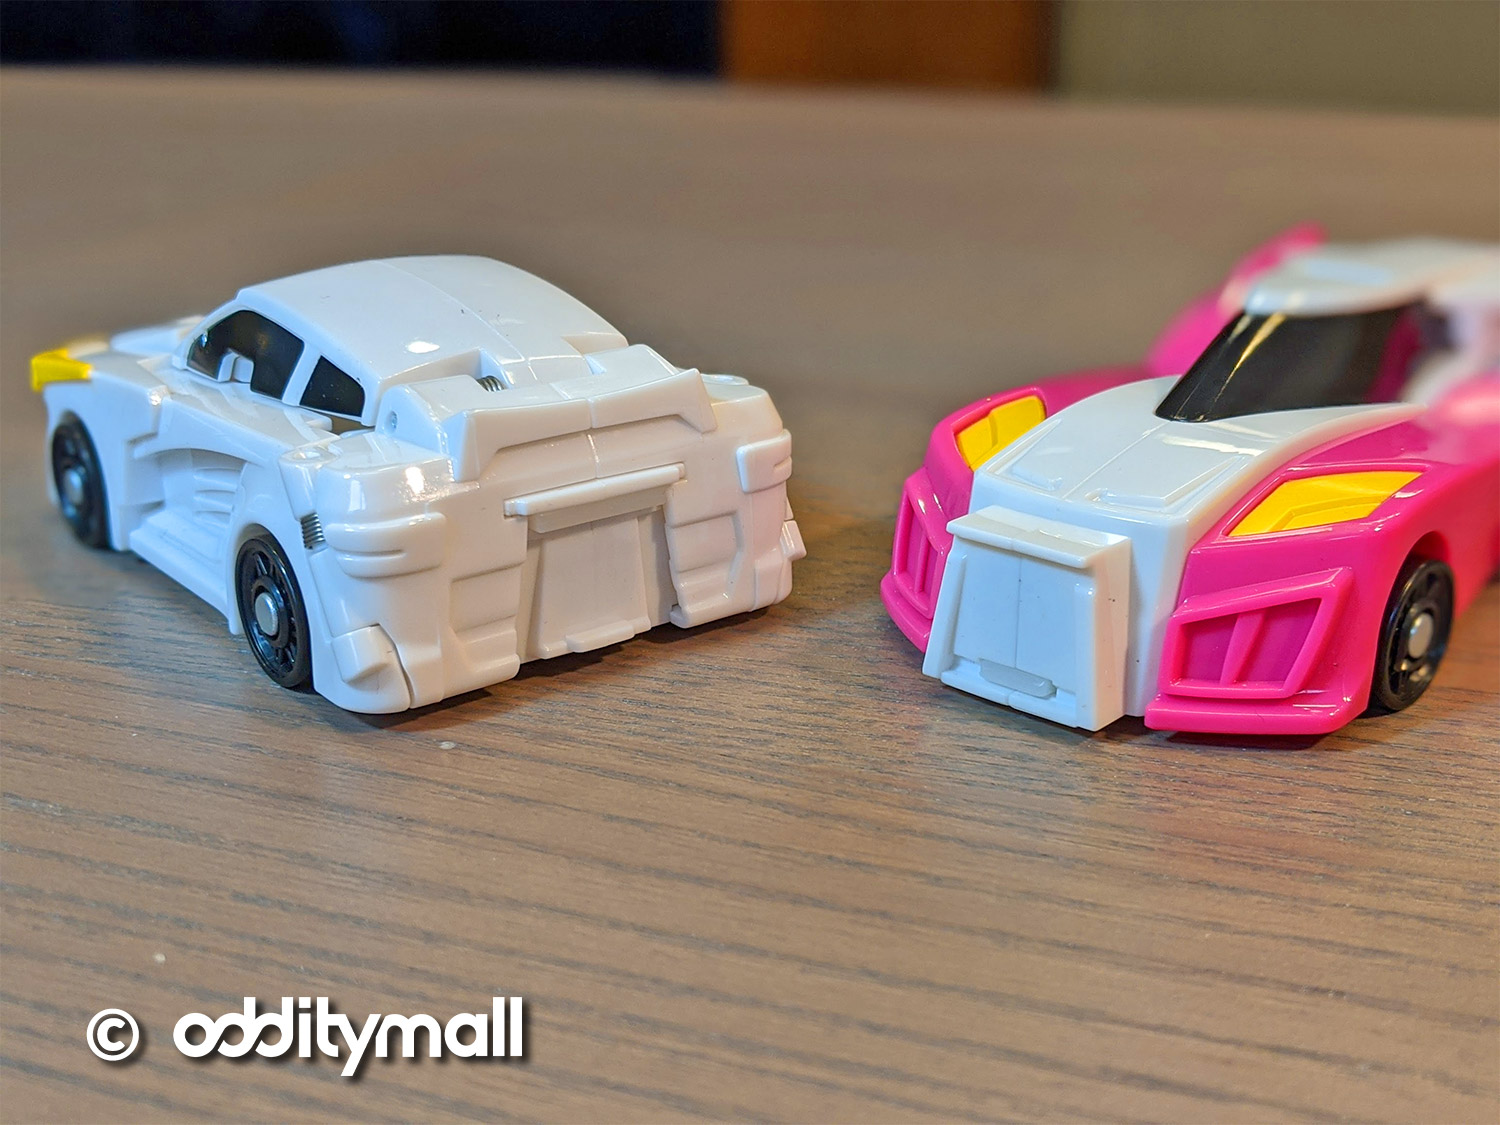 CarBot Magnetic Cars That Transform Into a Unicorn - Magnetic transforming toy